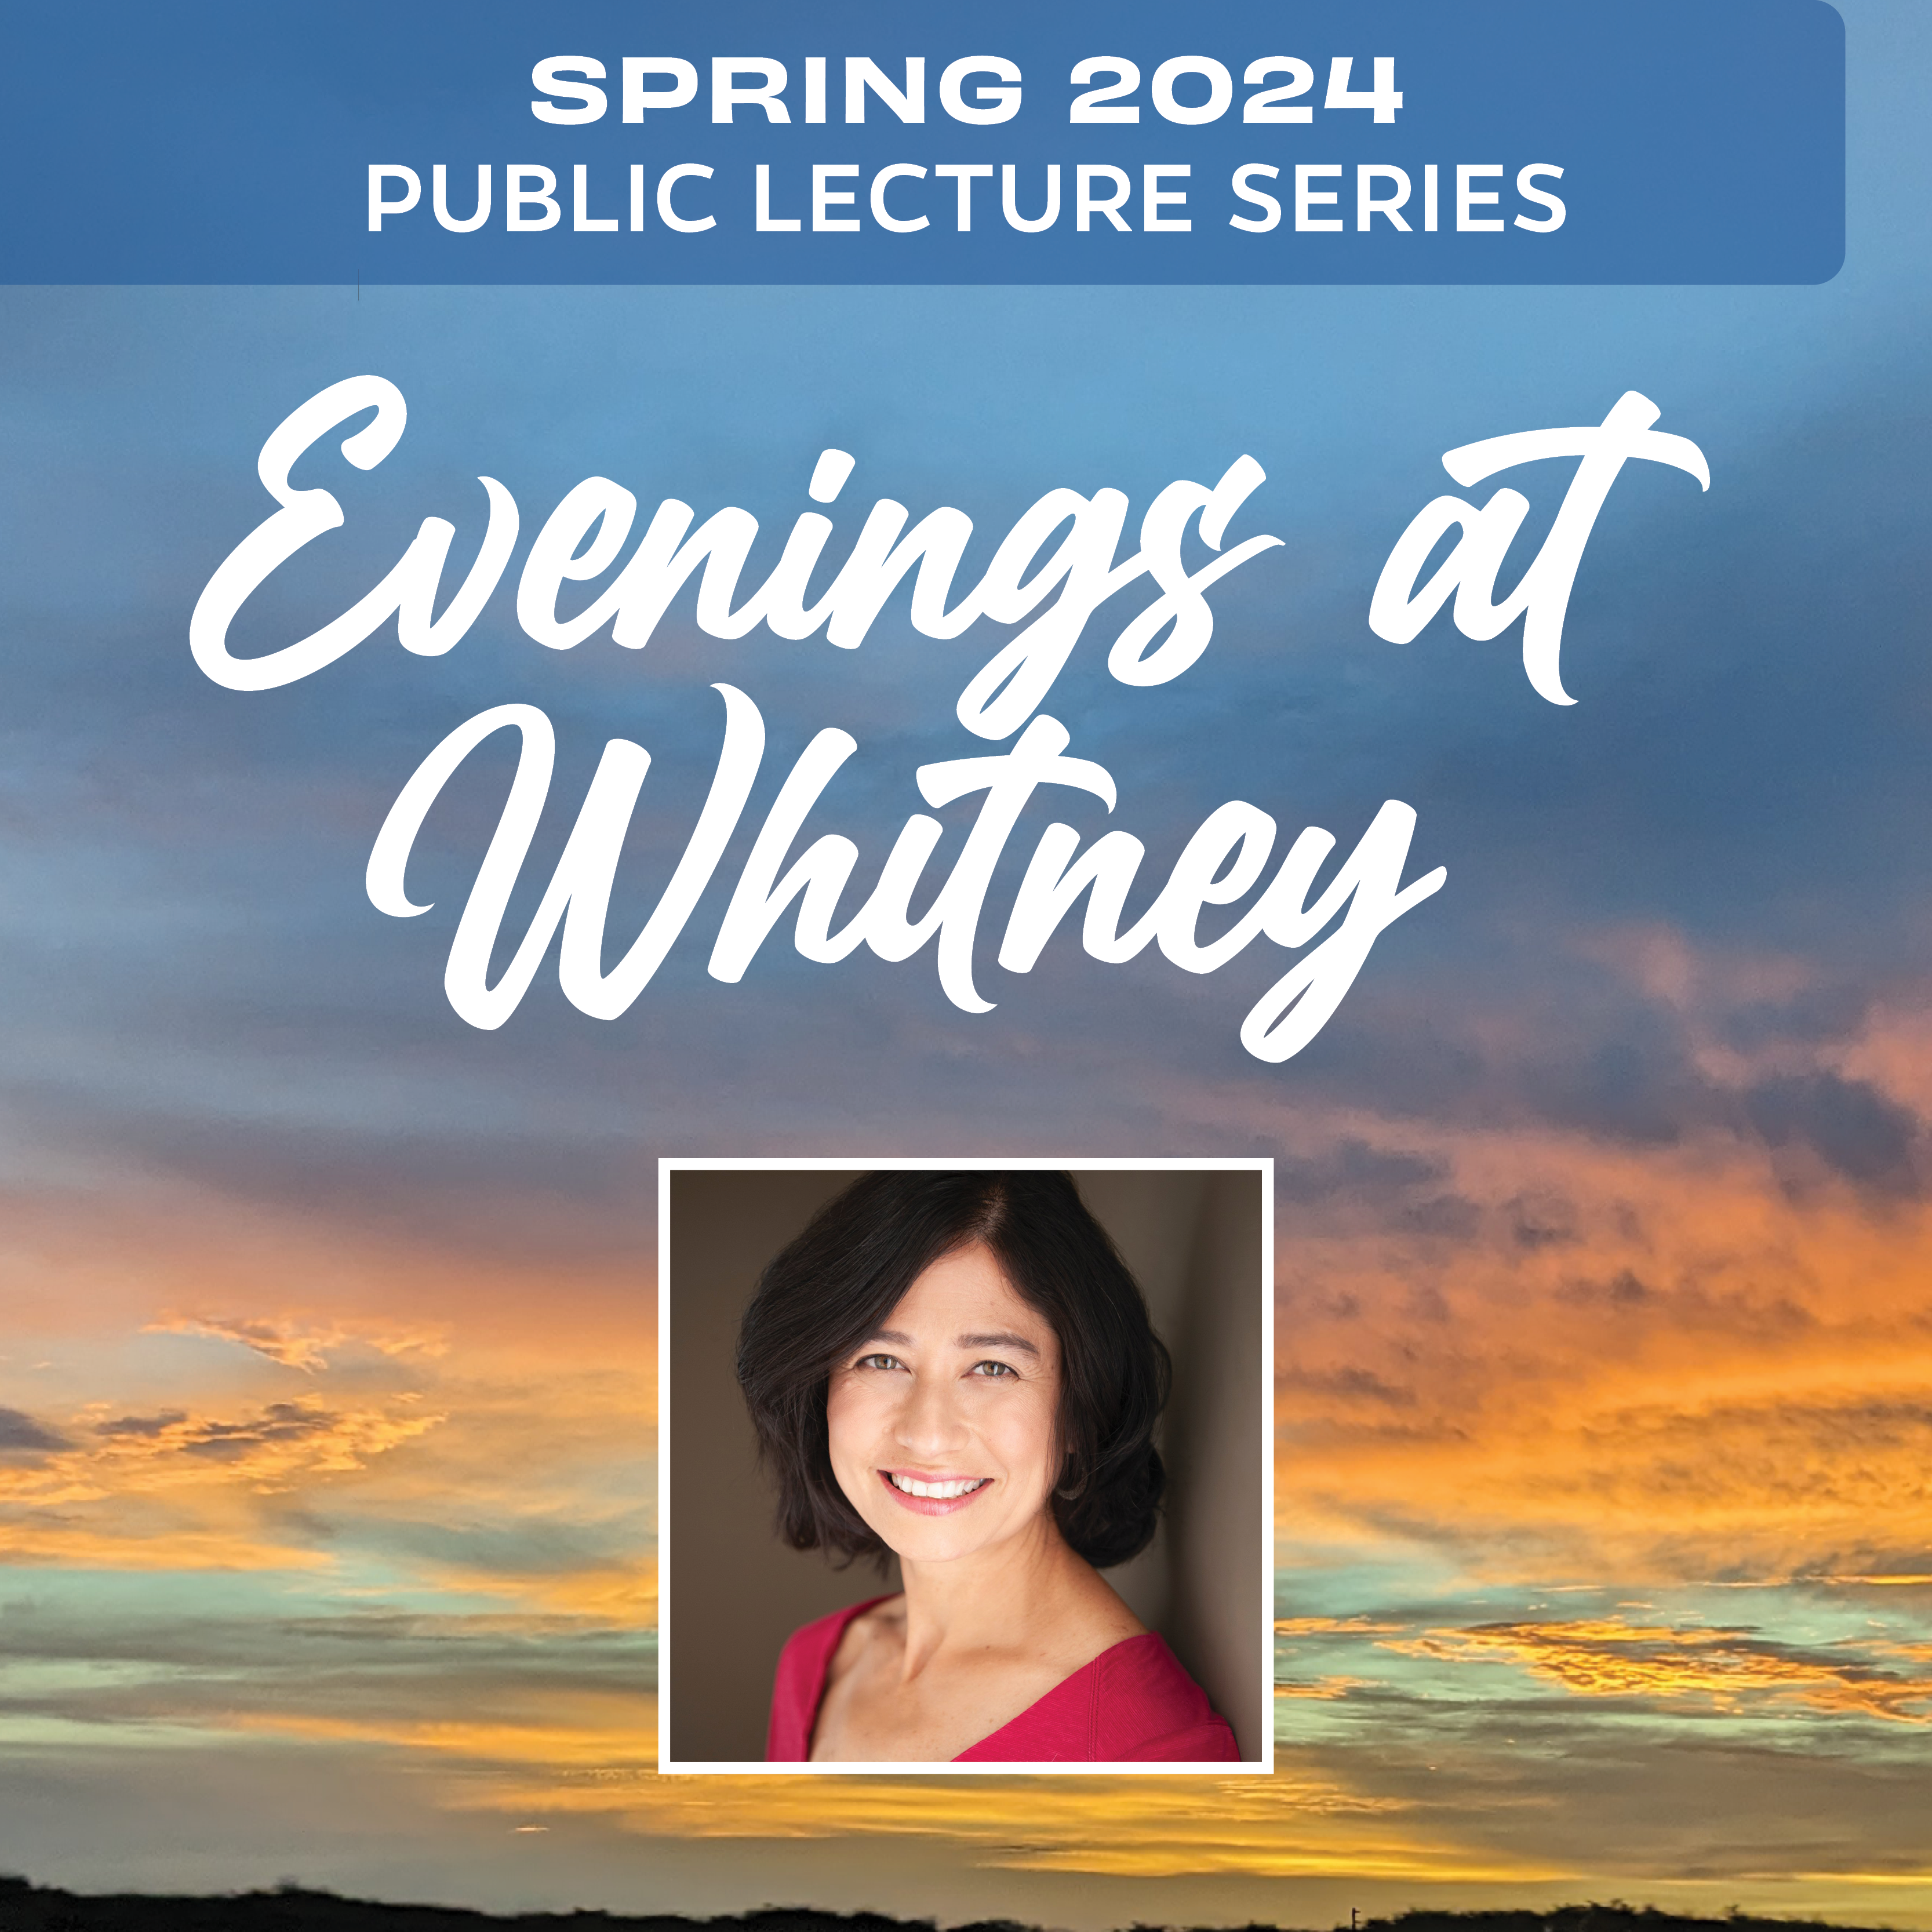 Evenings at Whitney graphic with speaker photo